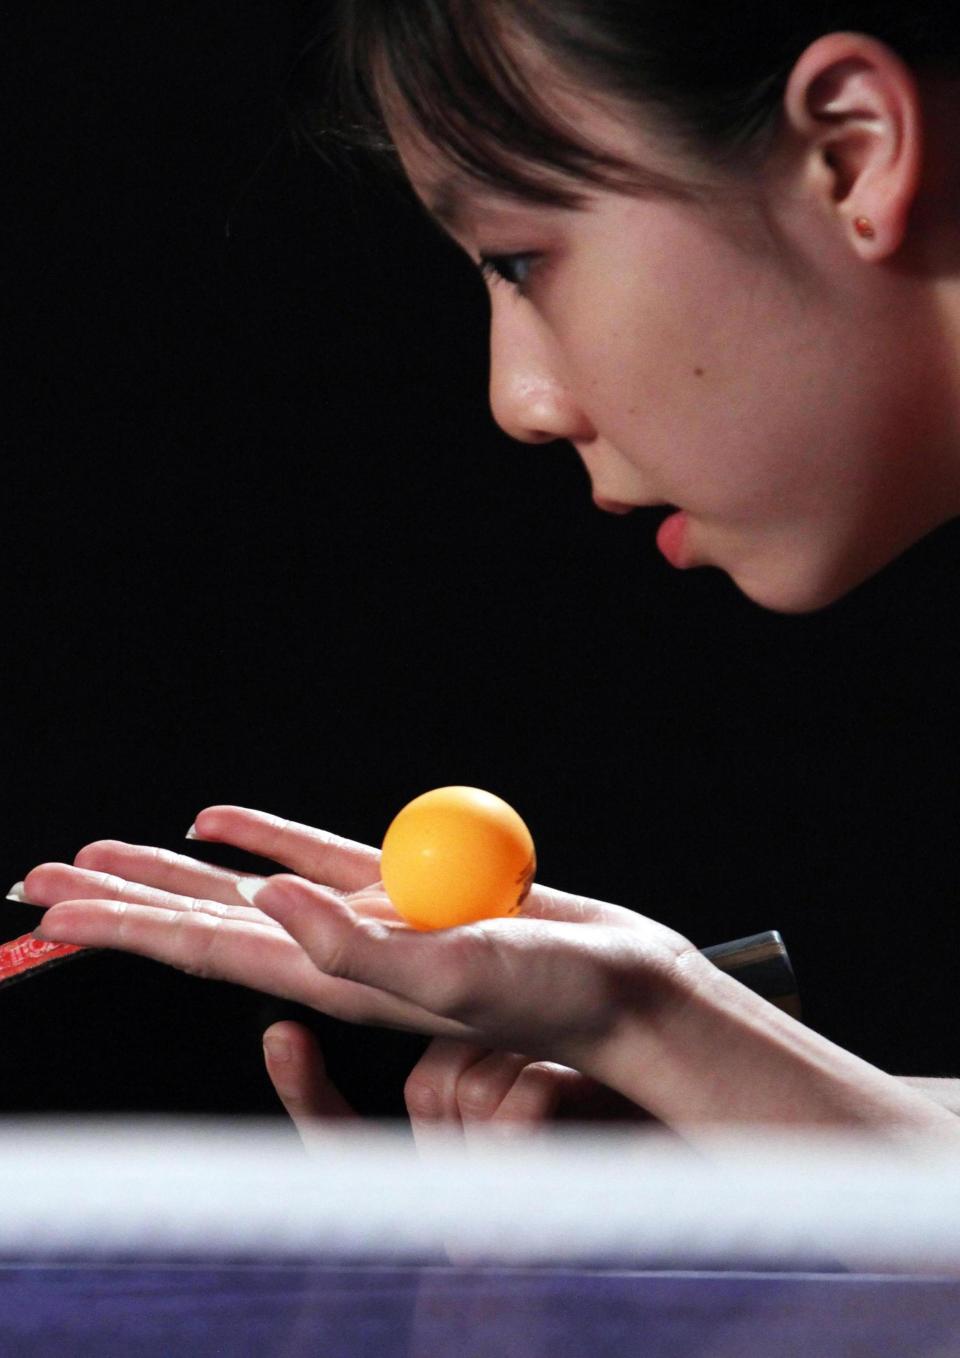 A still from the New Day film Top Spin. An orange table tennis ball rests in Teenage table tennis player Lily Zhang’s open palm. She crouches and looks in the direction of the ball, mouth slightly open in concentration. Her table tennis paddle is visible in her other hand as she prepares to serve the ball.